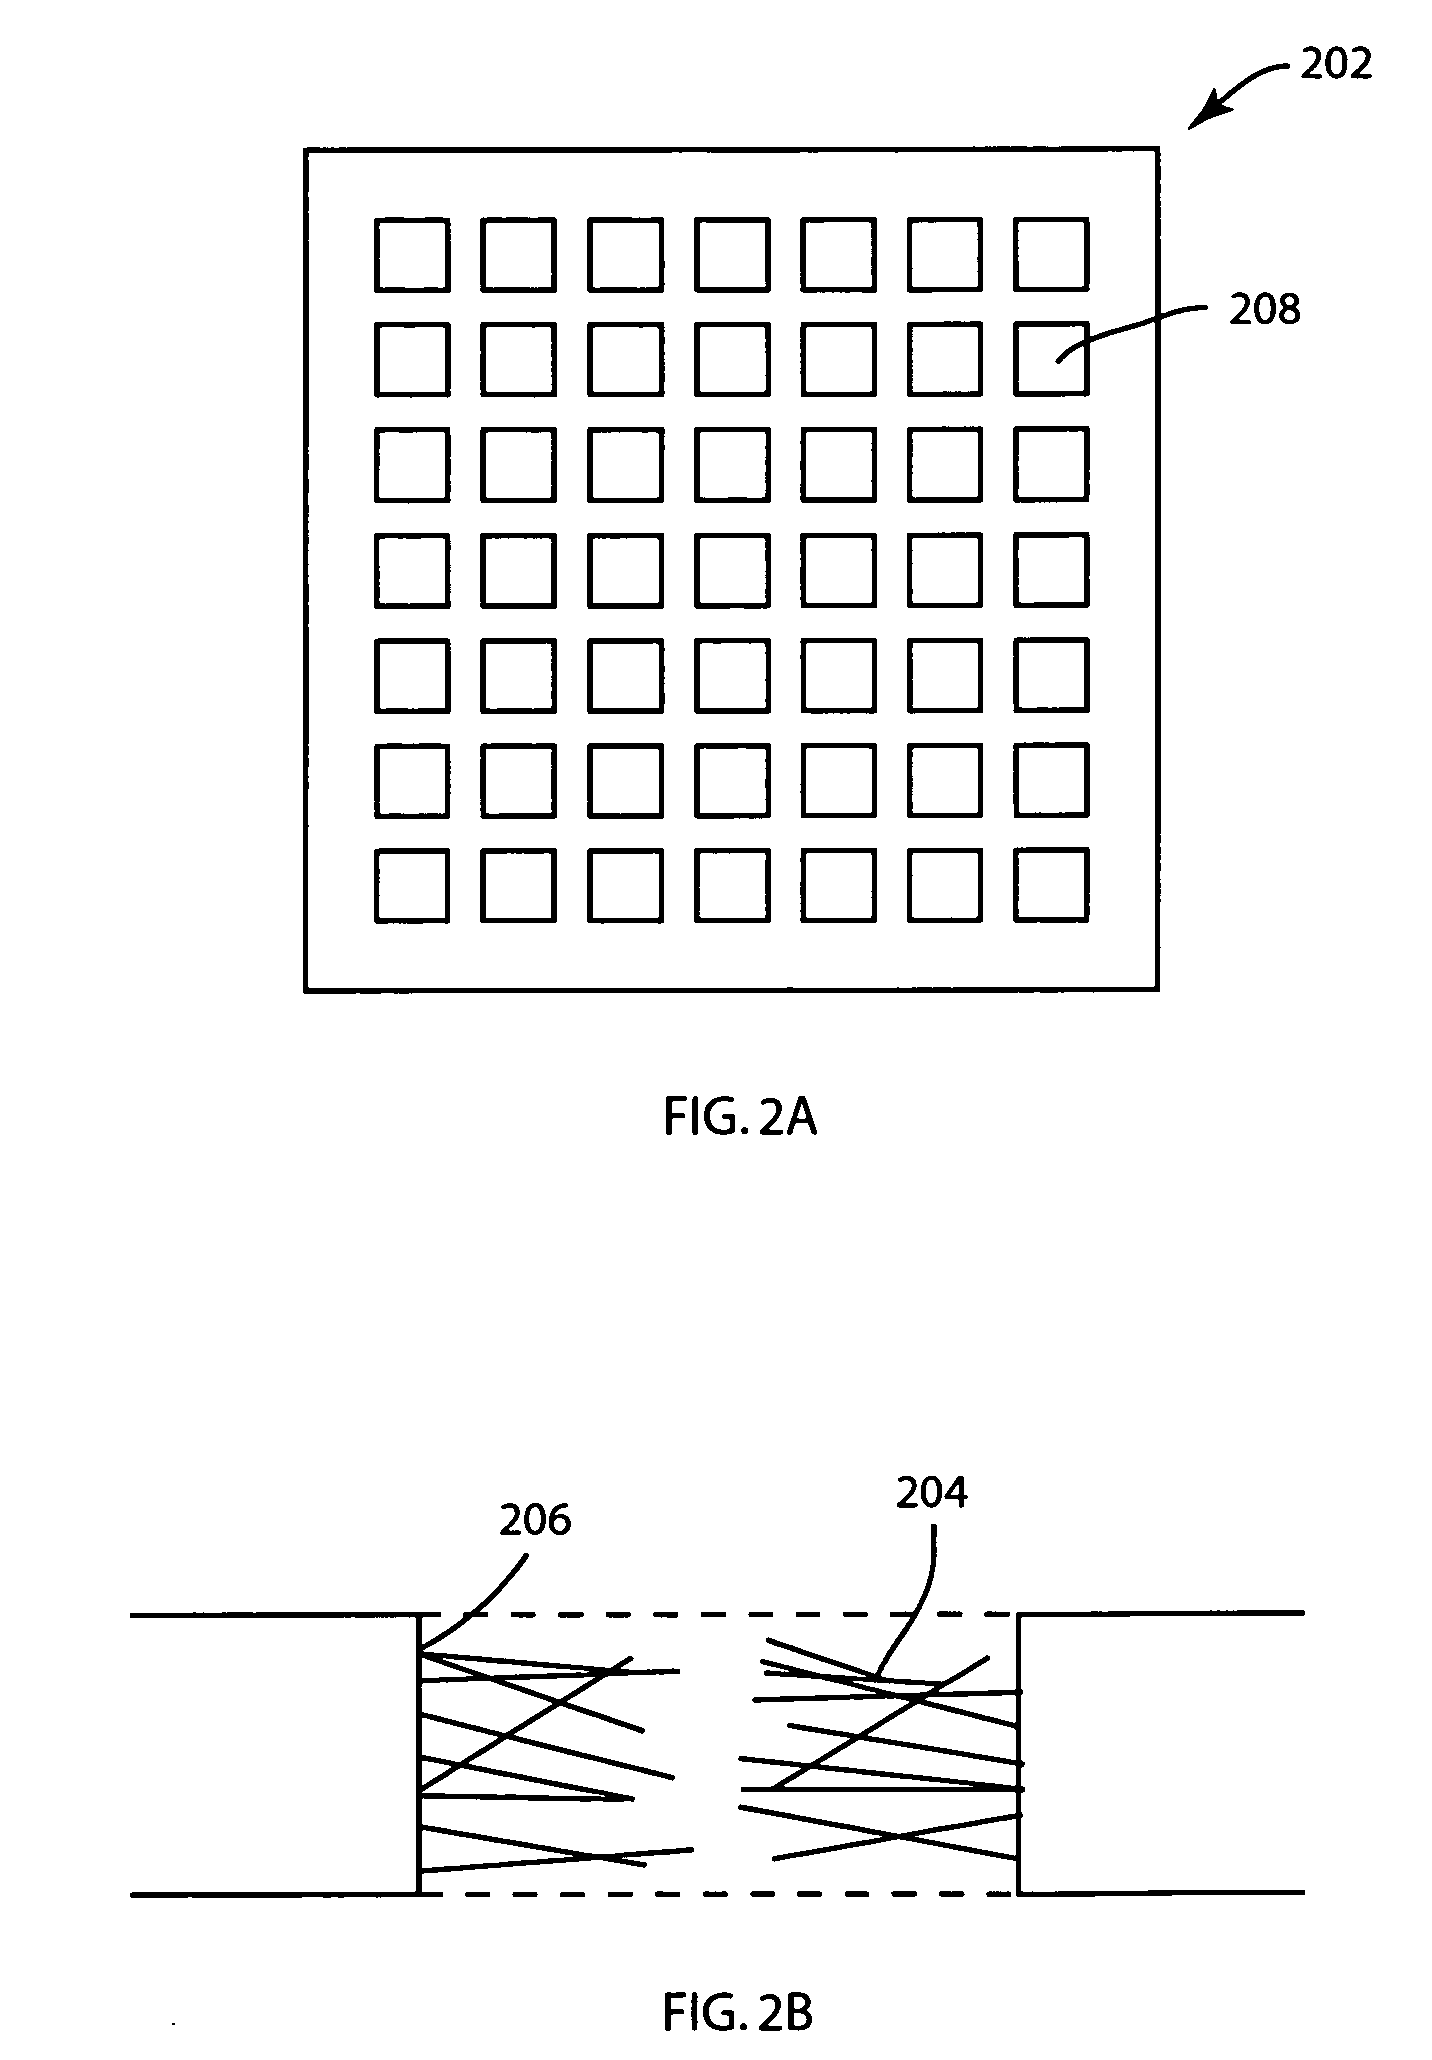 Porous substrates, articles, systems and compositions comprising nanofibers and methods of their use and production